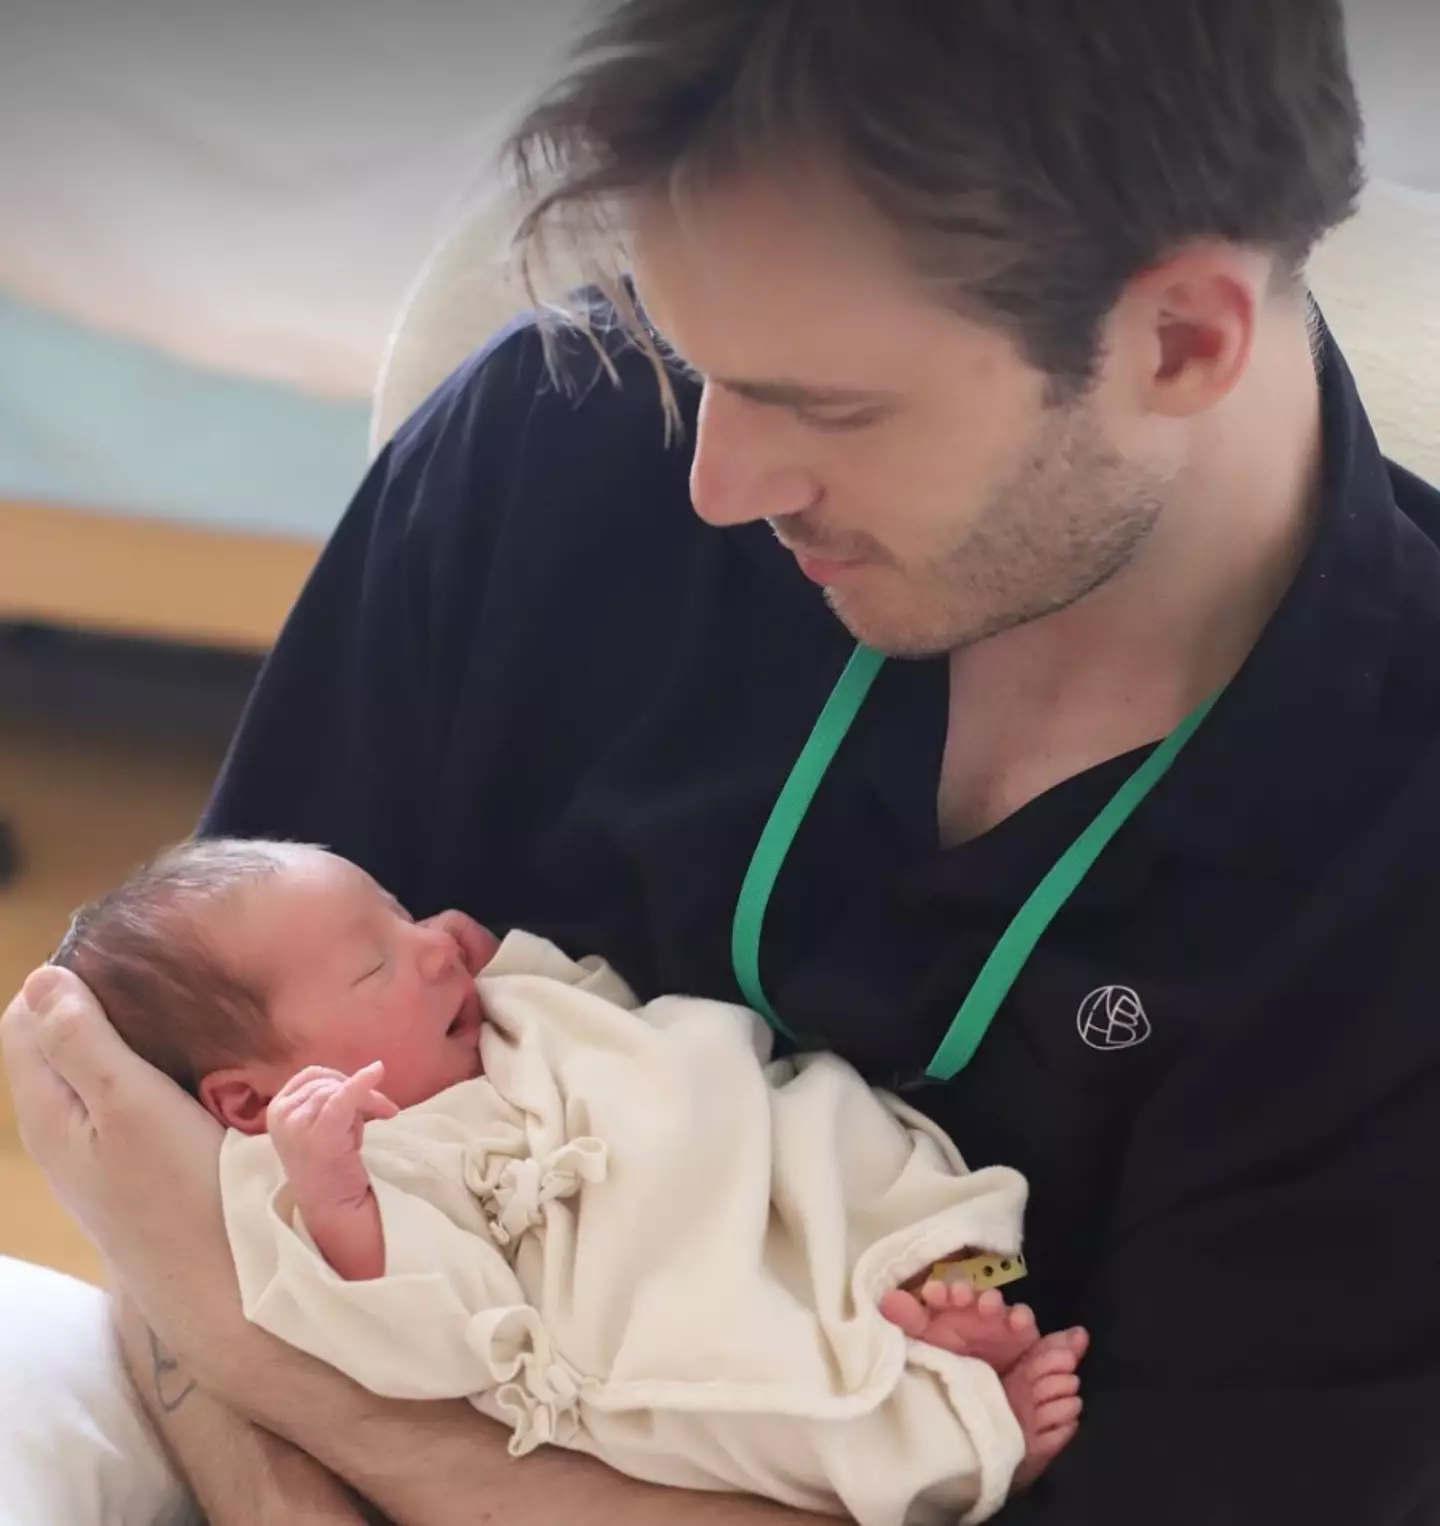 PewDiePie announced the arrival of his son on Instagram.